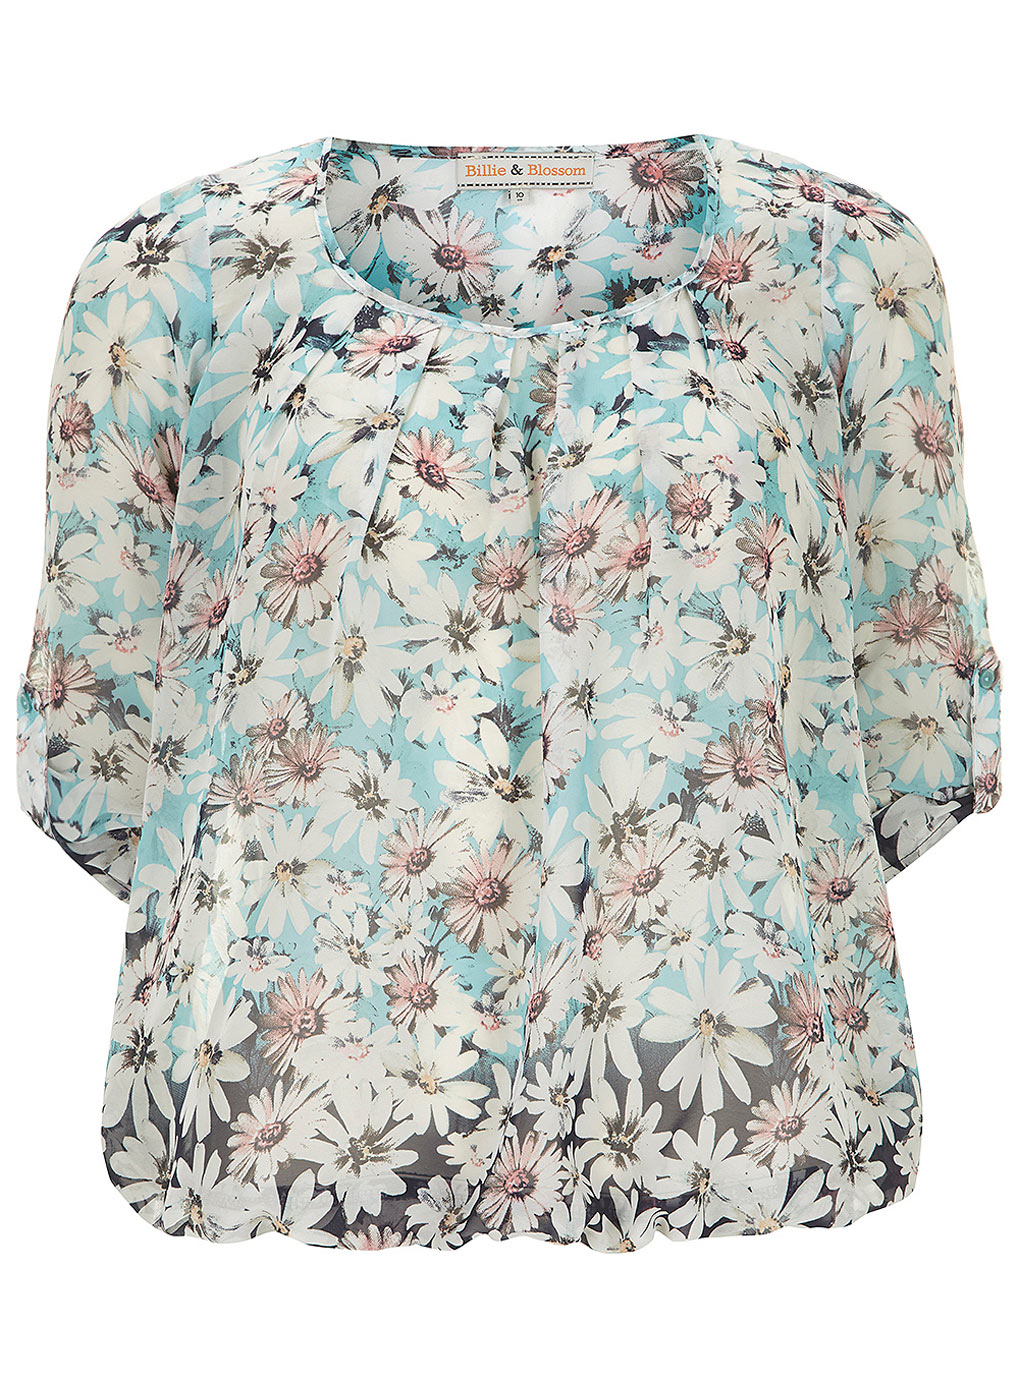 Dorothy Perkins Billie and Blossom Turquoise daisy blouse 12273996